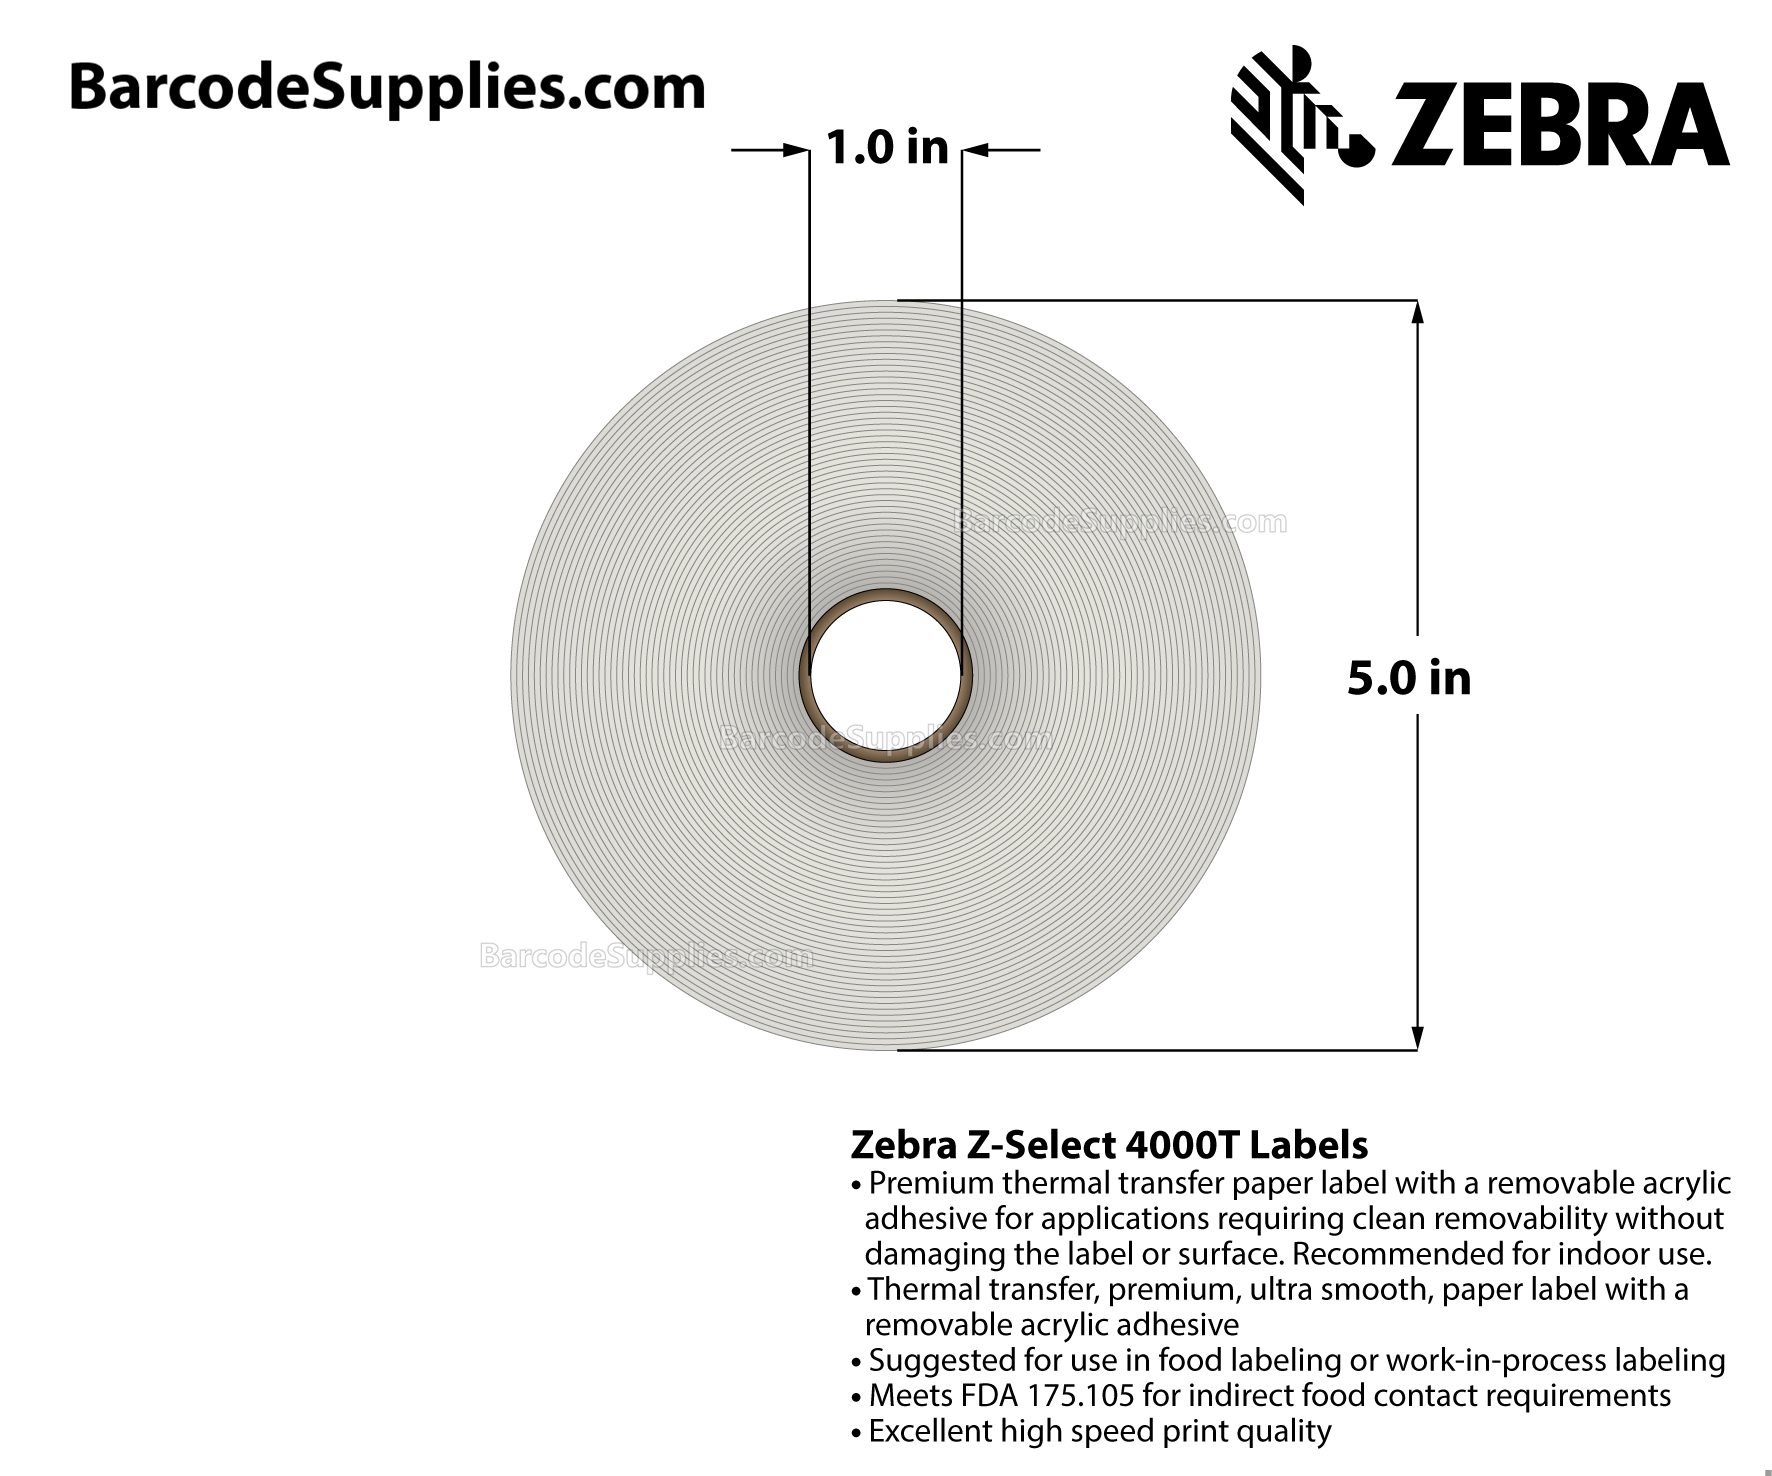 4 x 6 Thermal Transfer White Z-Select 4000T Removable Labels With Removable Adhesive - Perforated - 430 Labels Per Roll - Carton Of 6 Rolls - 2580 Labels Total - MPN: 10005849